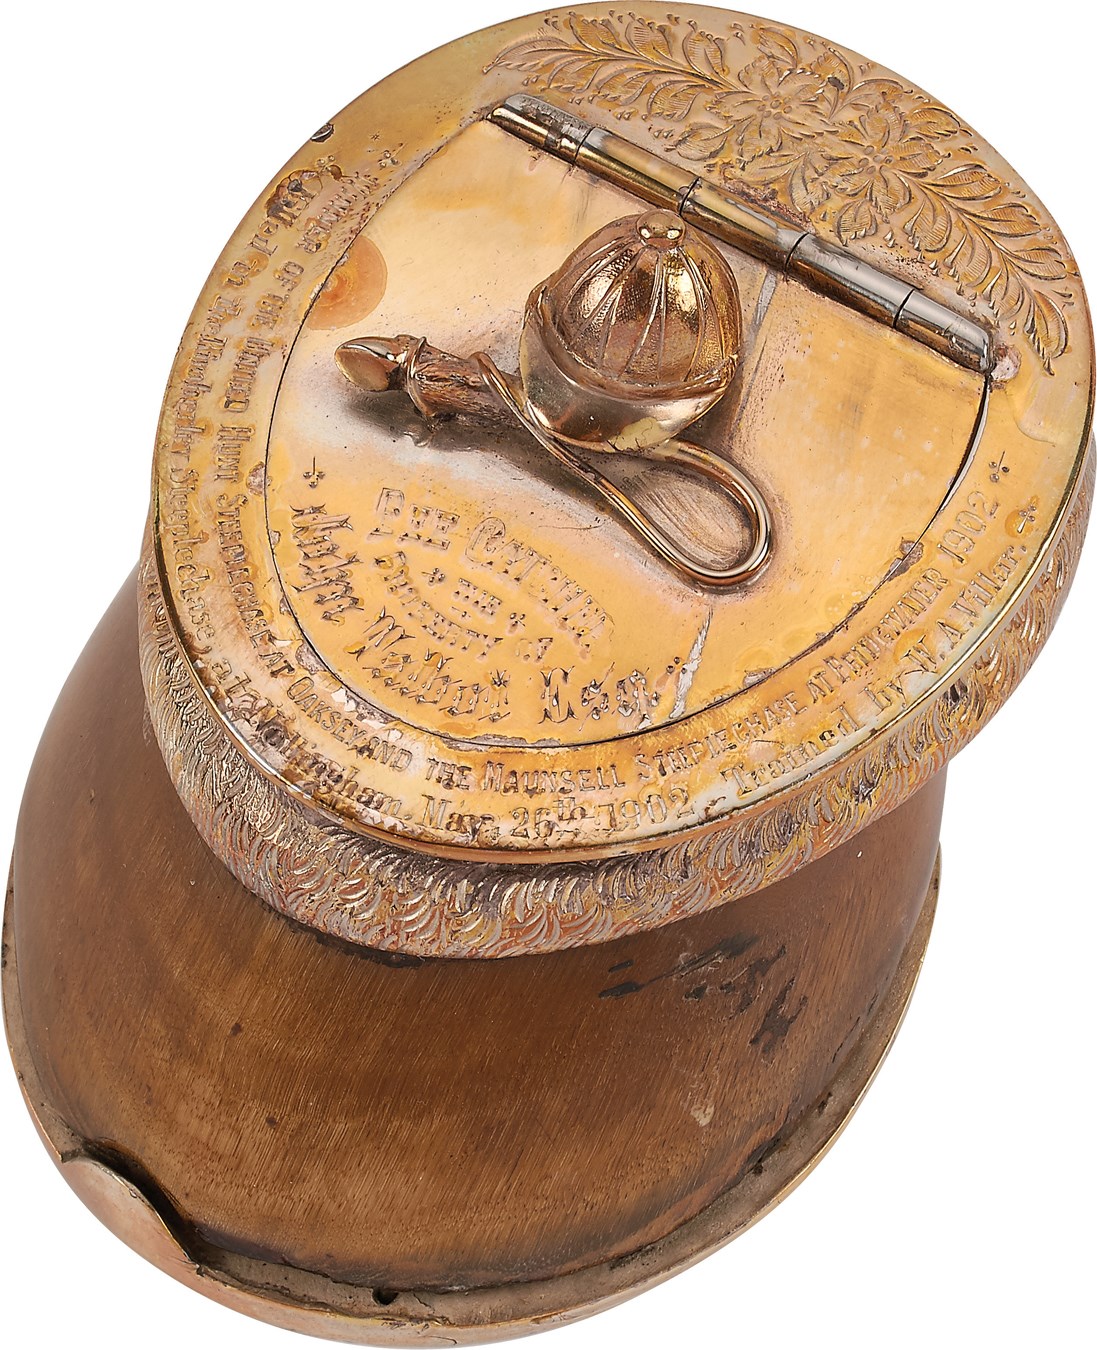 Horse Racing - 1902 "Bee Catcher" Presentation Horseshoe Inkwell Made from His Hoof & Shoe - Champion Killed in Spill